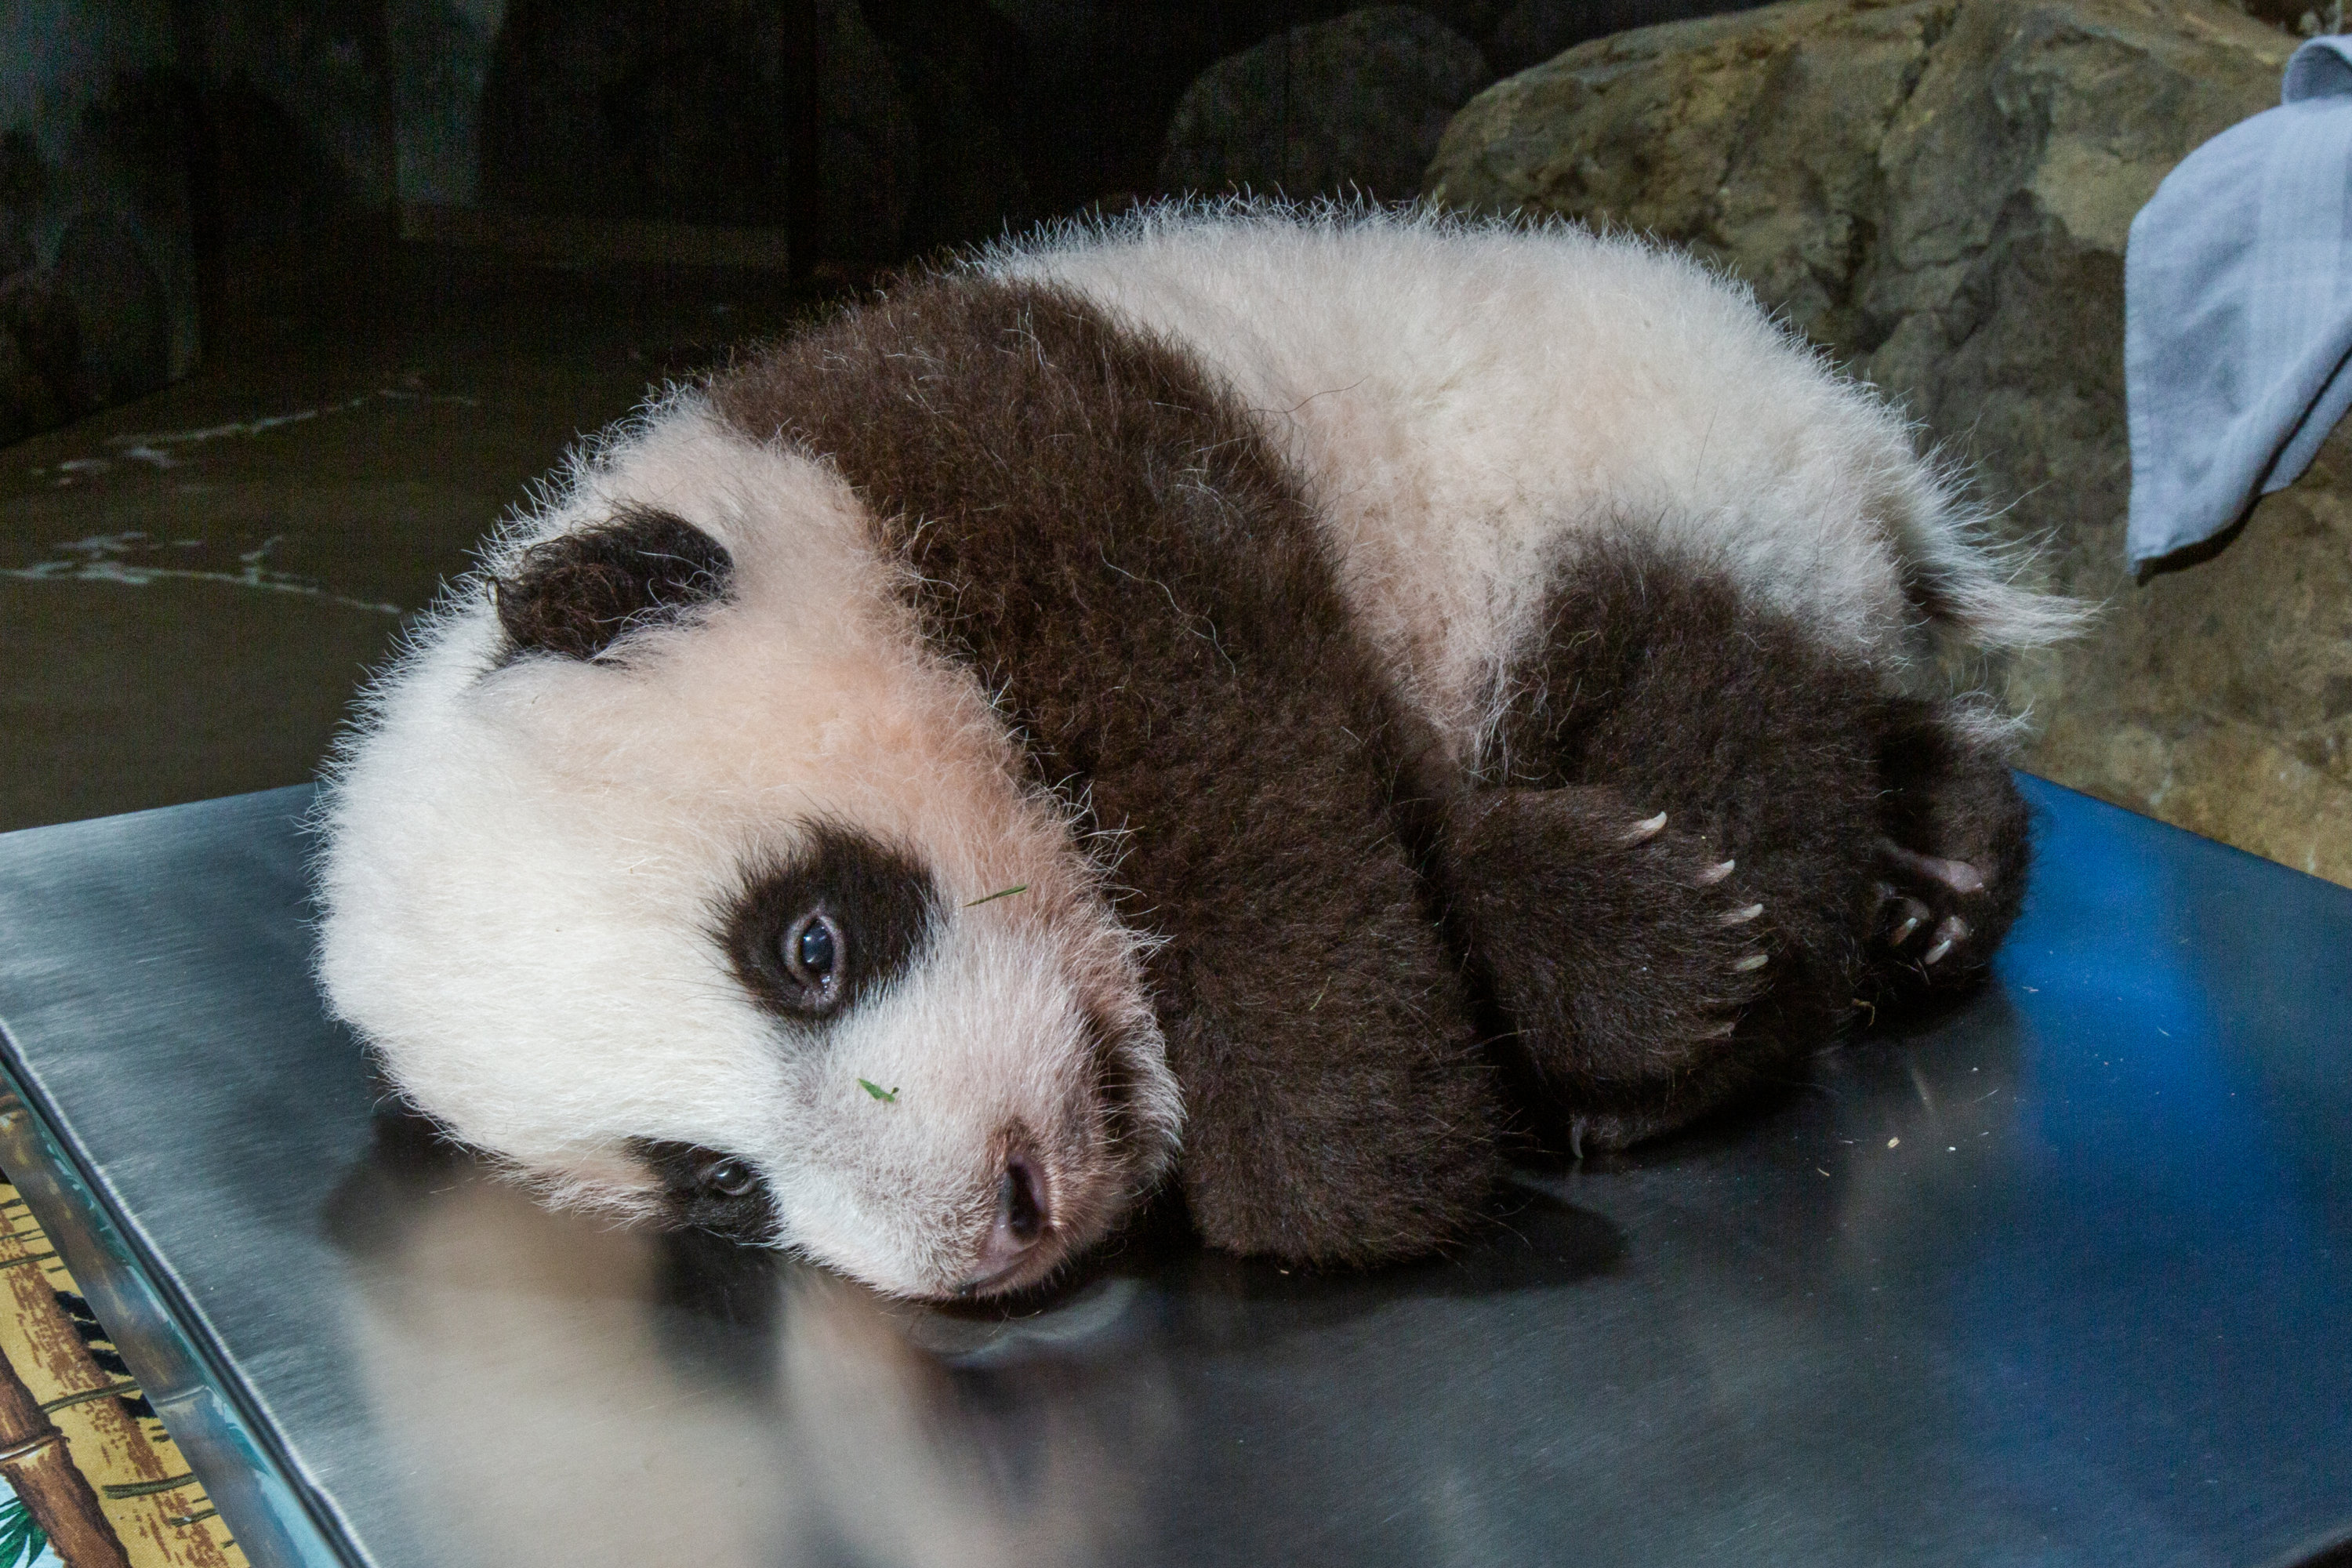 While We've All Been Freaking Out, Here's What the Baby Panda Has Been  Doing This Week - Washingtonian